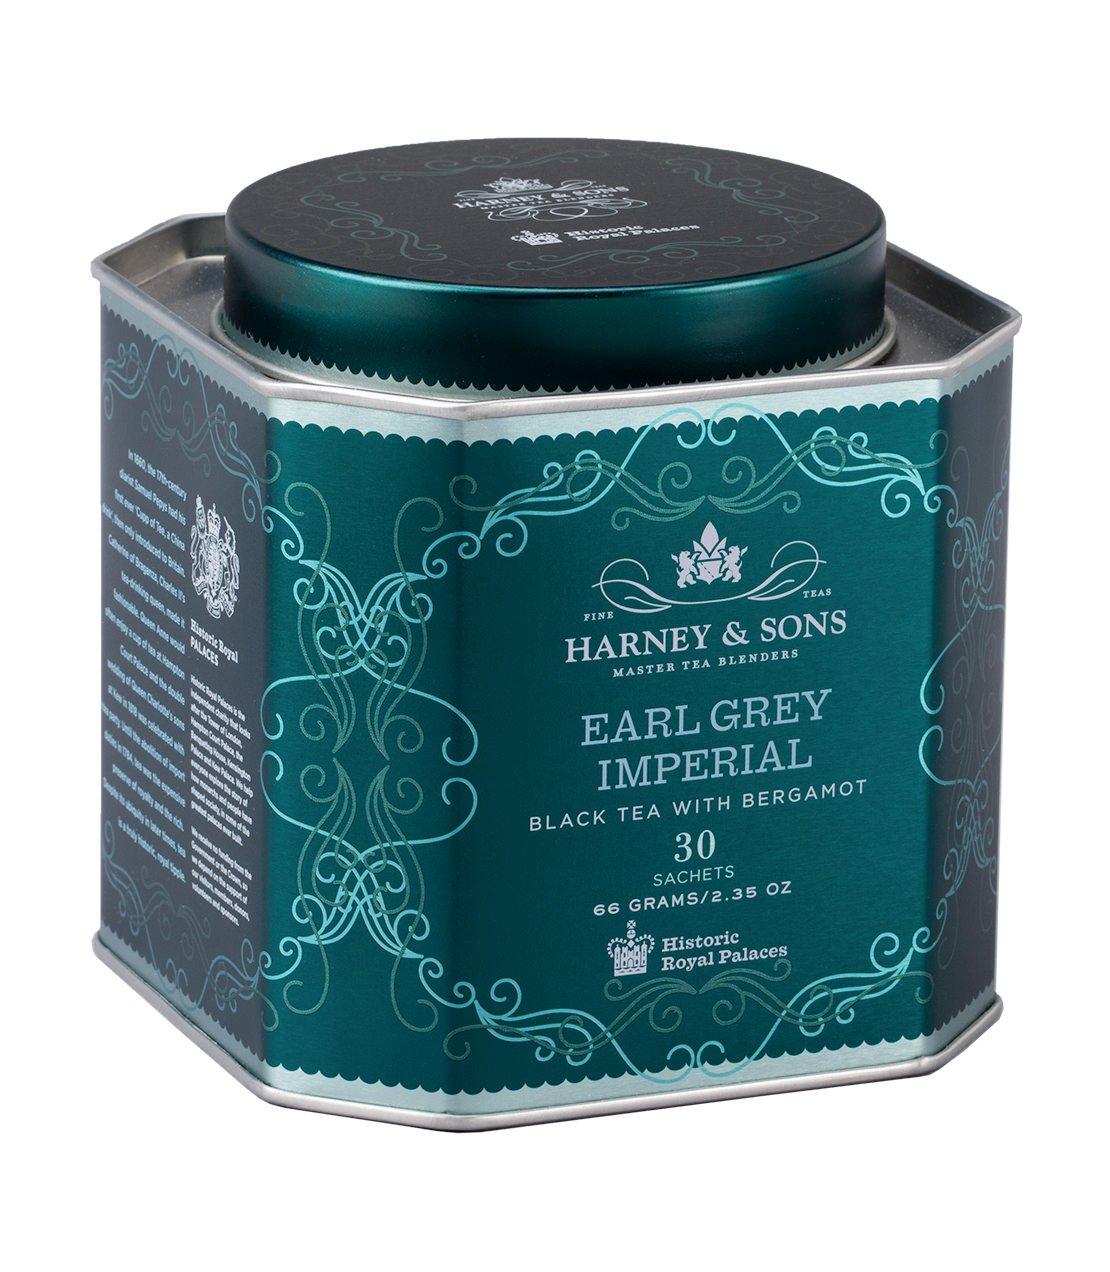 Earl Grey Imperial - Historic Royal Palaces Collection - Tin of 30 Sachets - Harney & Sons Fine Teas Europe